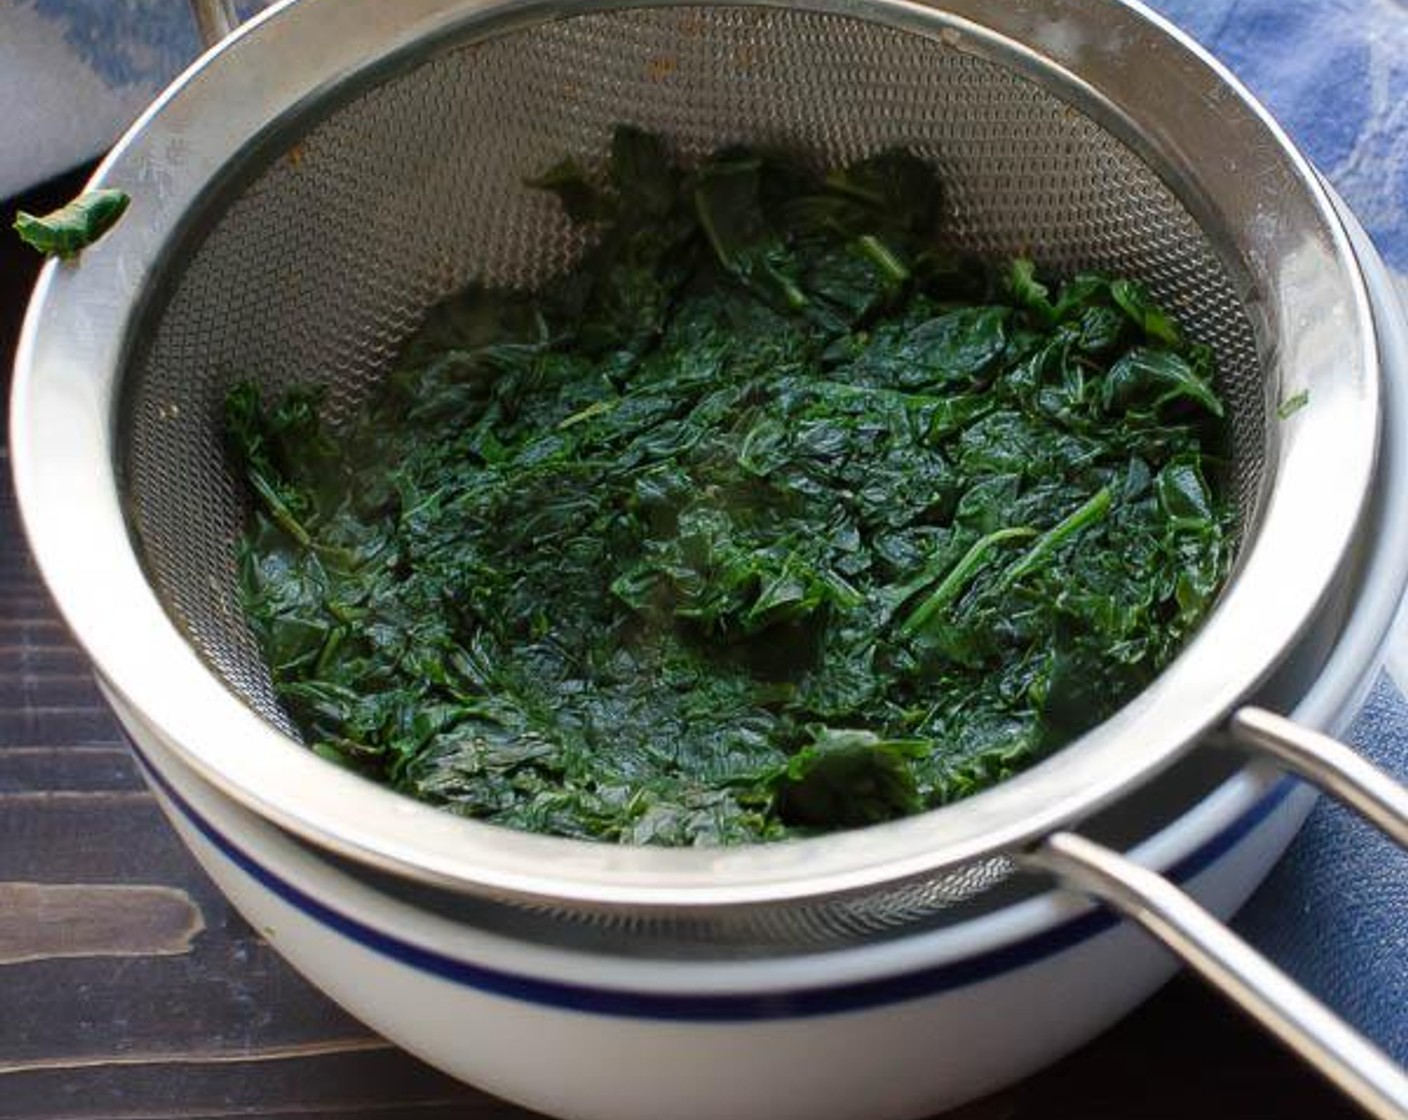 step 4 Steam the kale for 2 to 3 minutes until wilted, but still bright green. Transfer the kale to a fine mesh sieve and press on the kale with the back of a spoon to squeeze out all of the excess water and set aside.